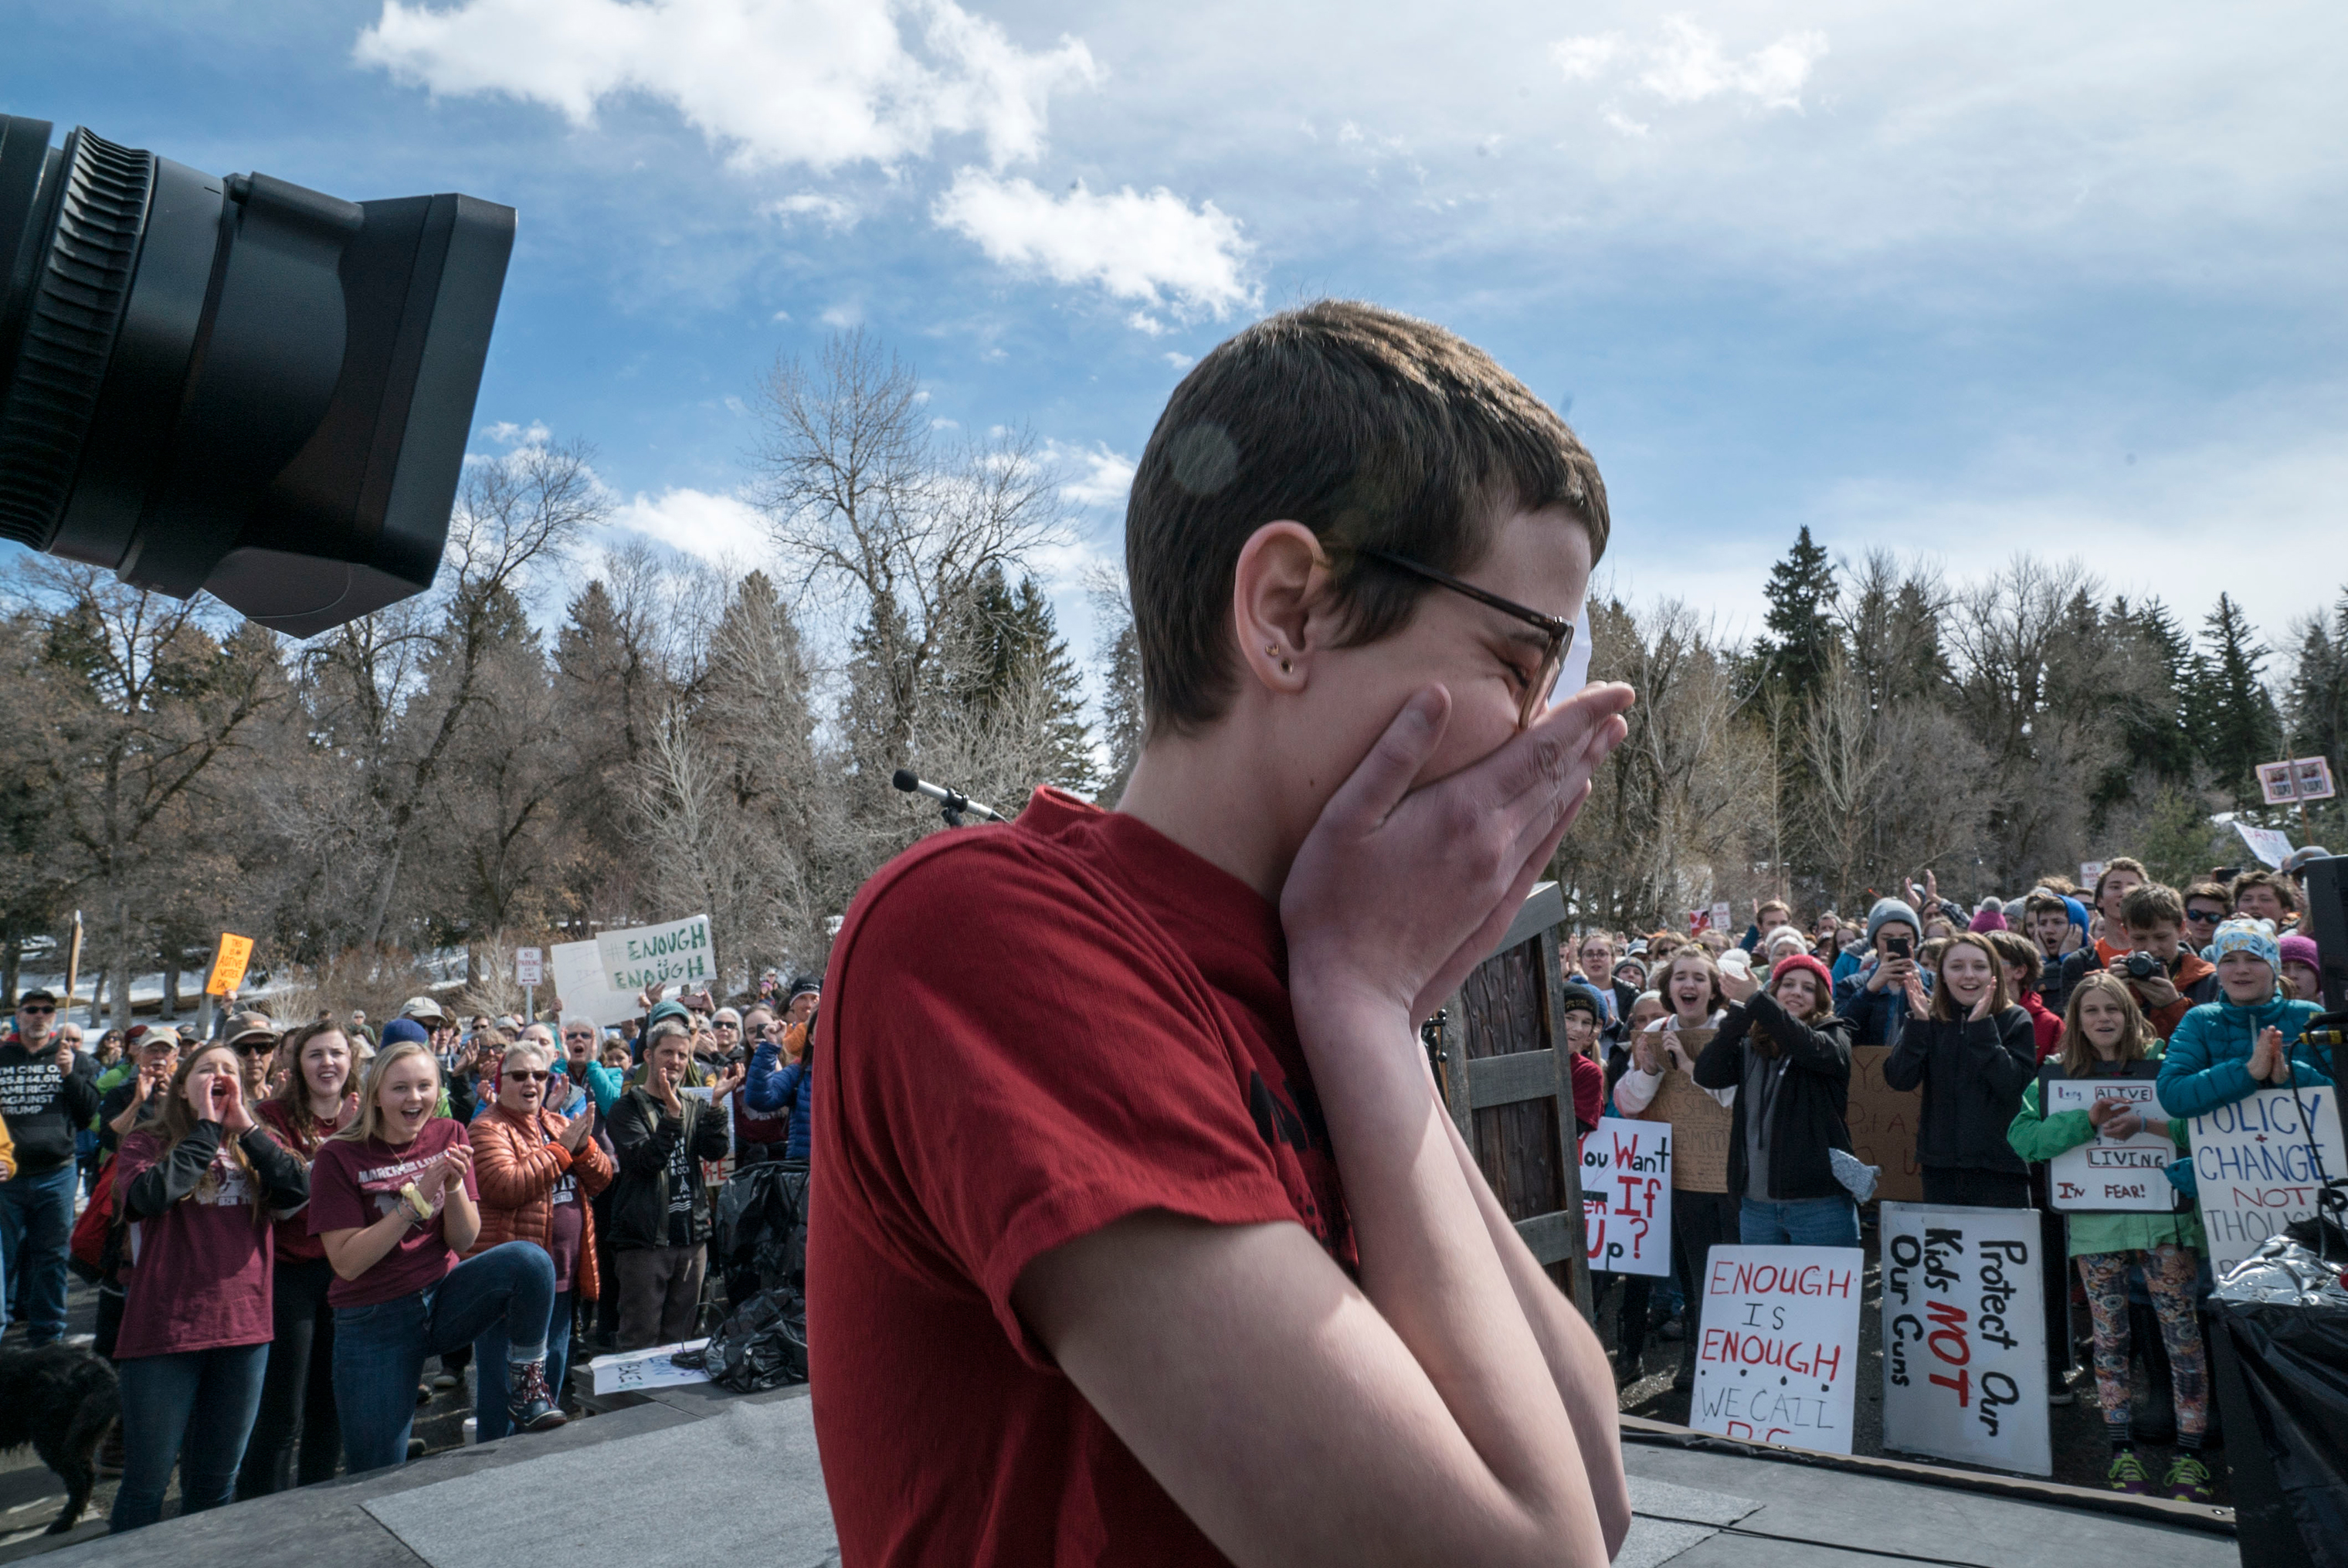 Bozeman High School freshman Timea Laatsch became emotional after speaking to the crowd. (Paul Moakley for TIME)